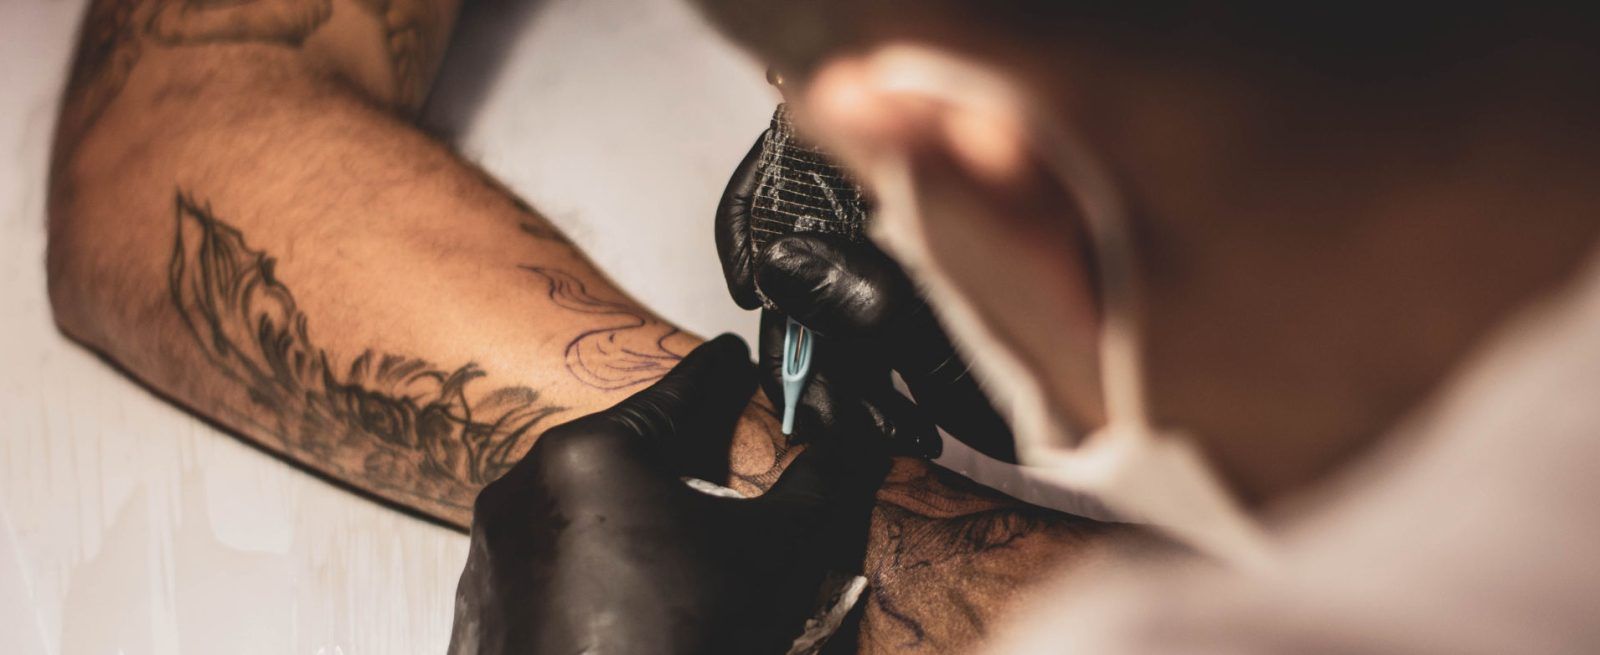 Fresh ink: Tattoos can be addictive, says owner of new Logan shop |  Allaccess | hjnews.com